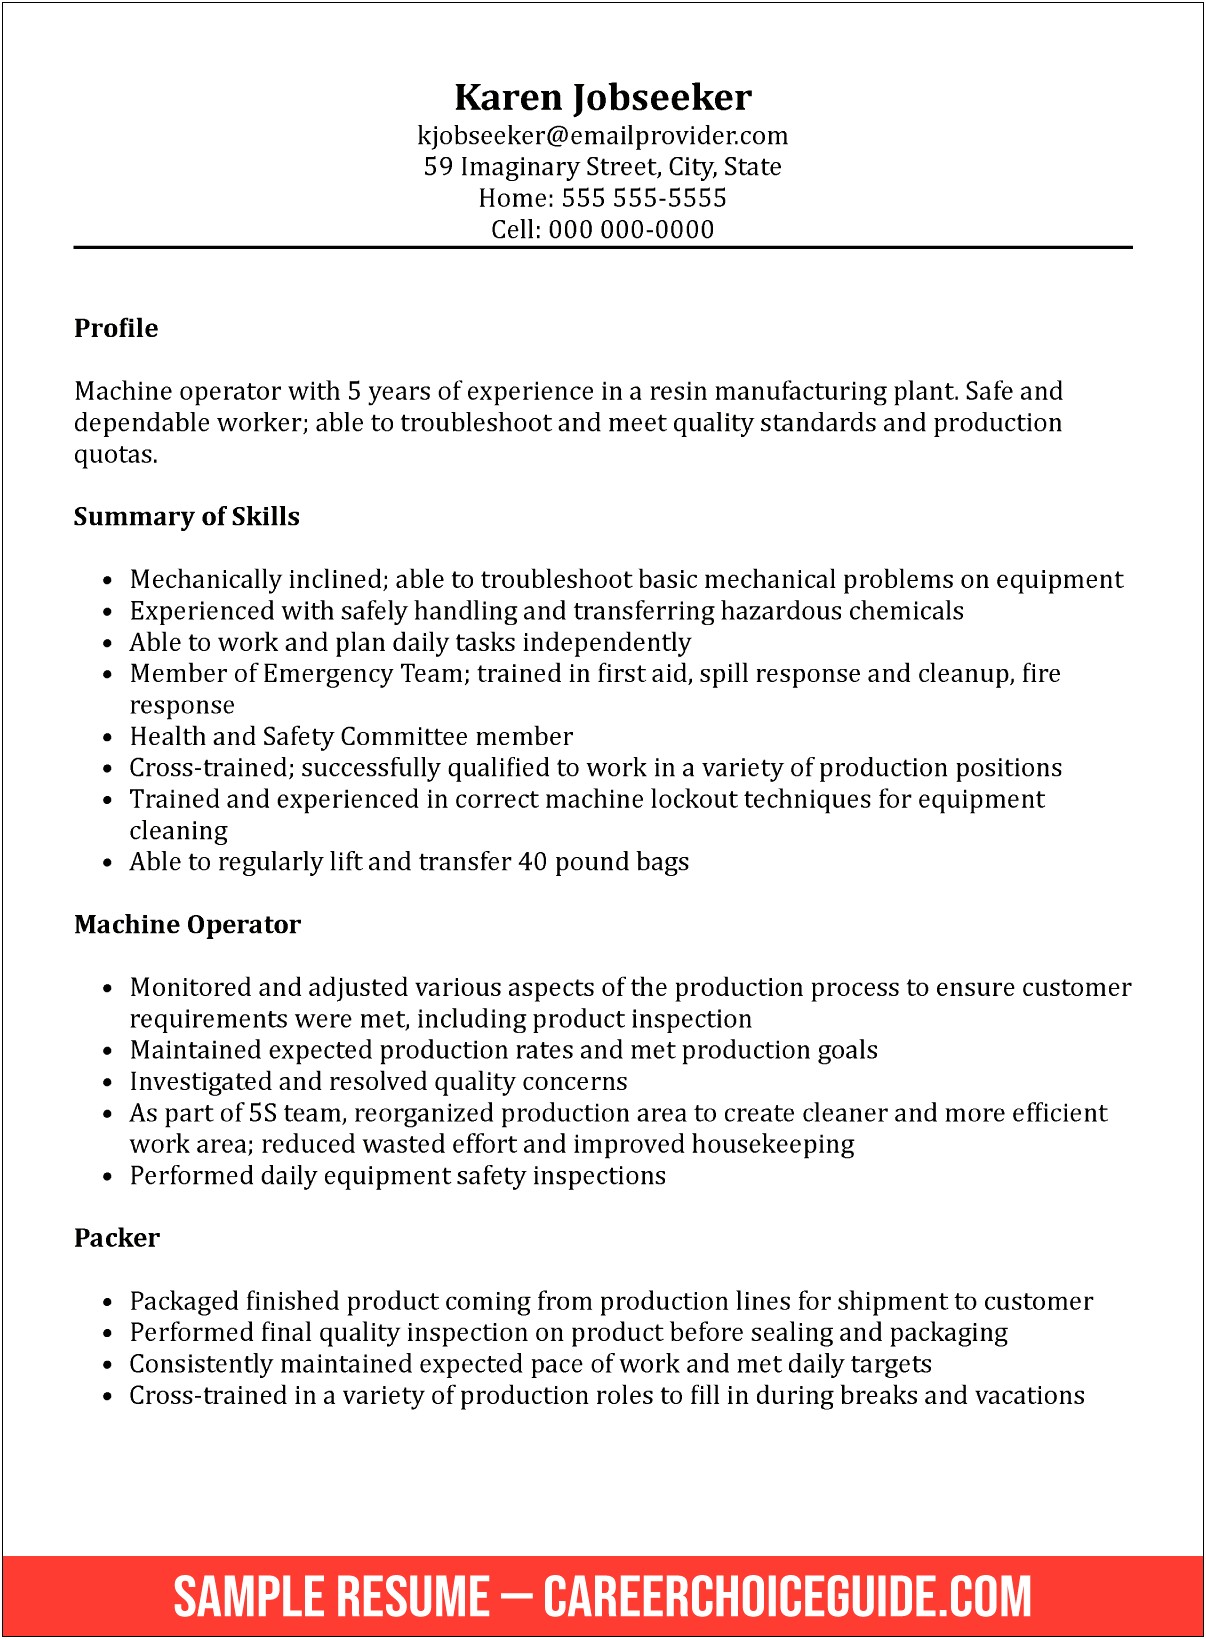 Examples For Summary In The Resume